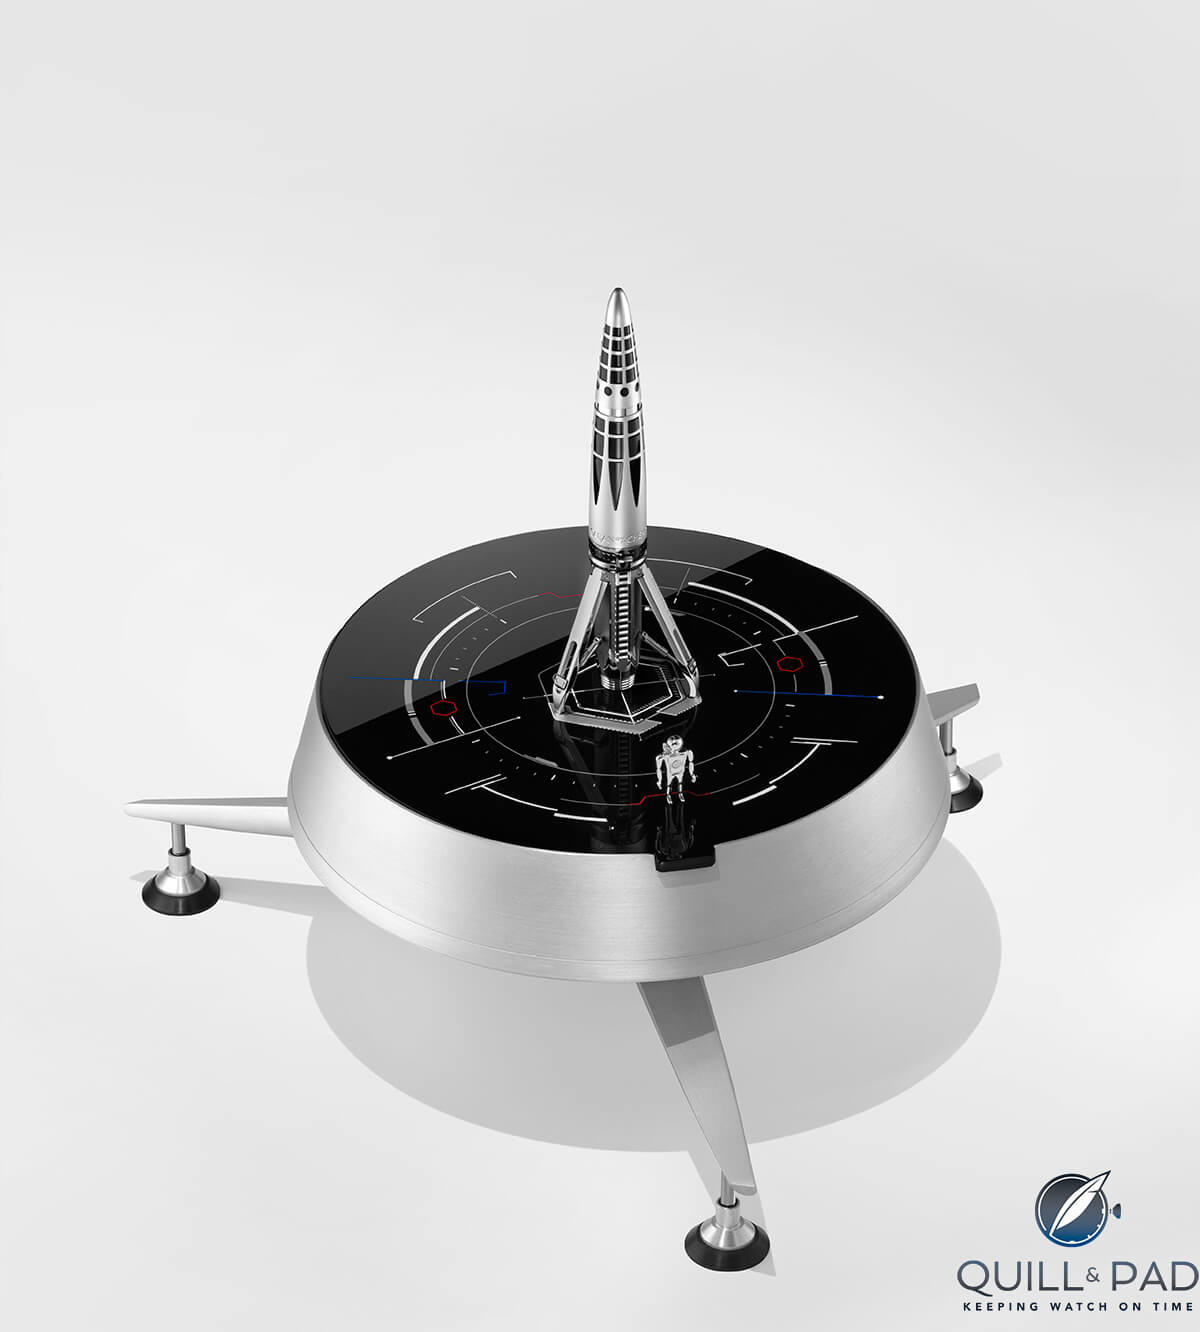 Astrograph by Caran d'Ache and MB&F